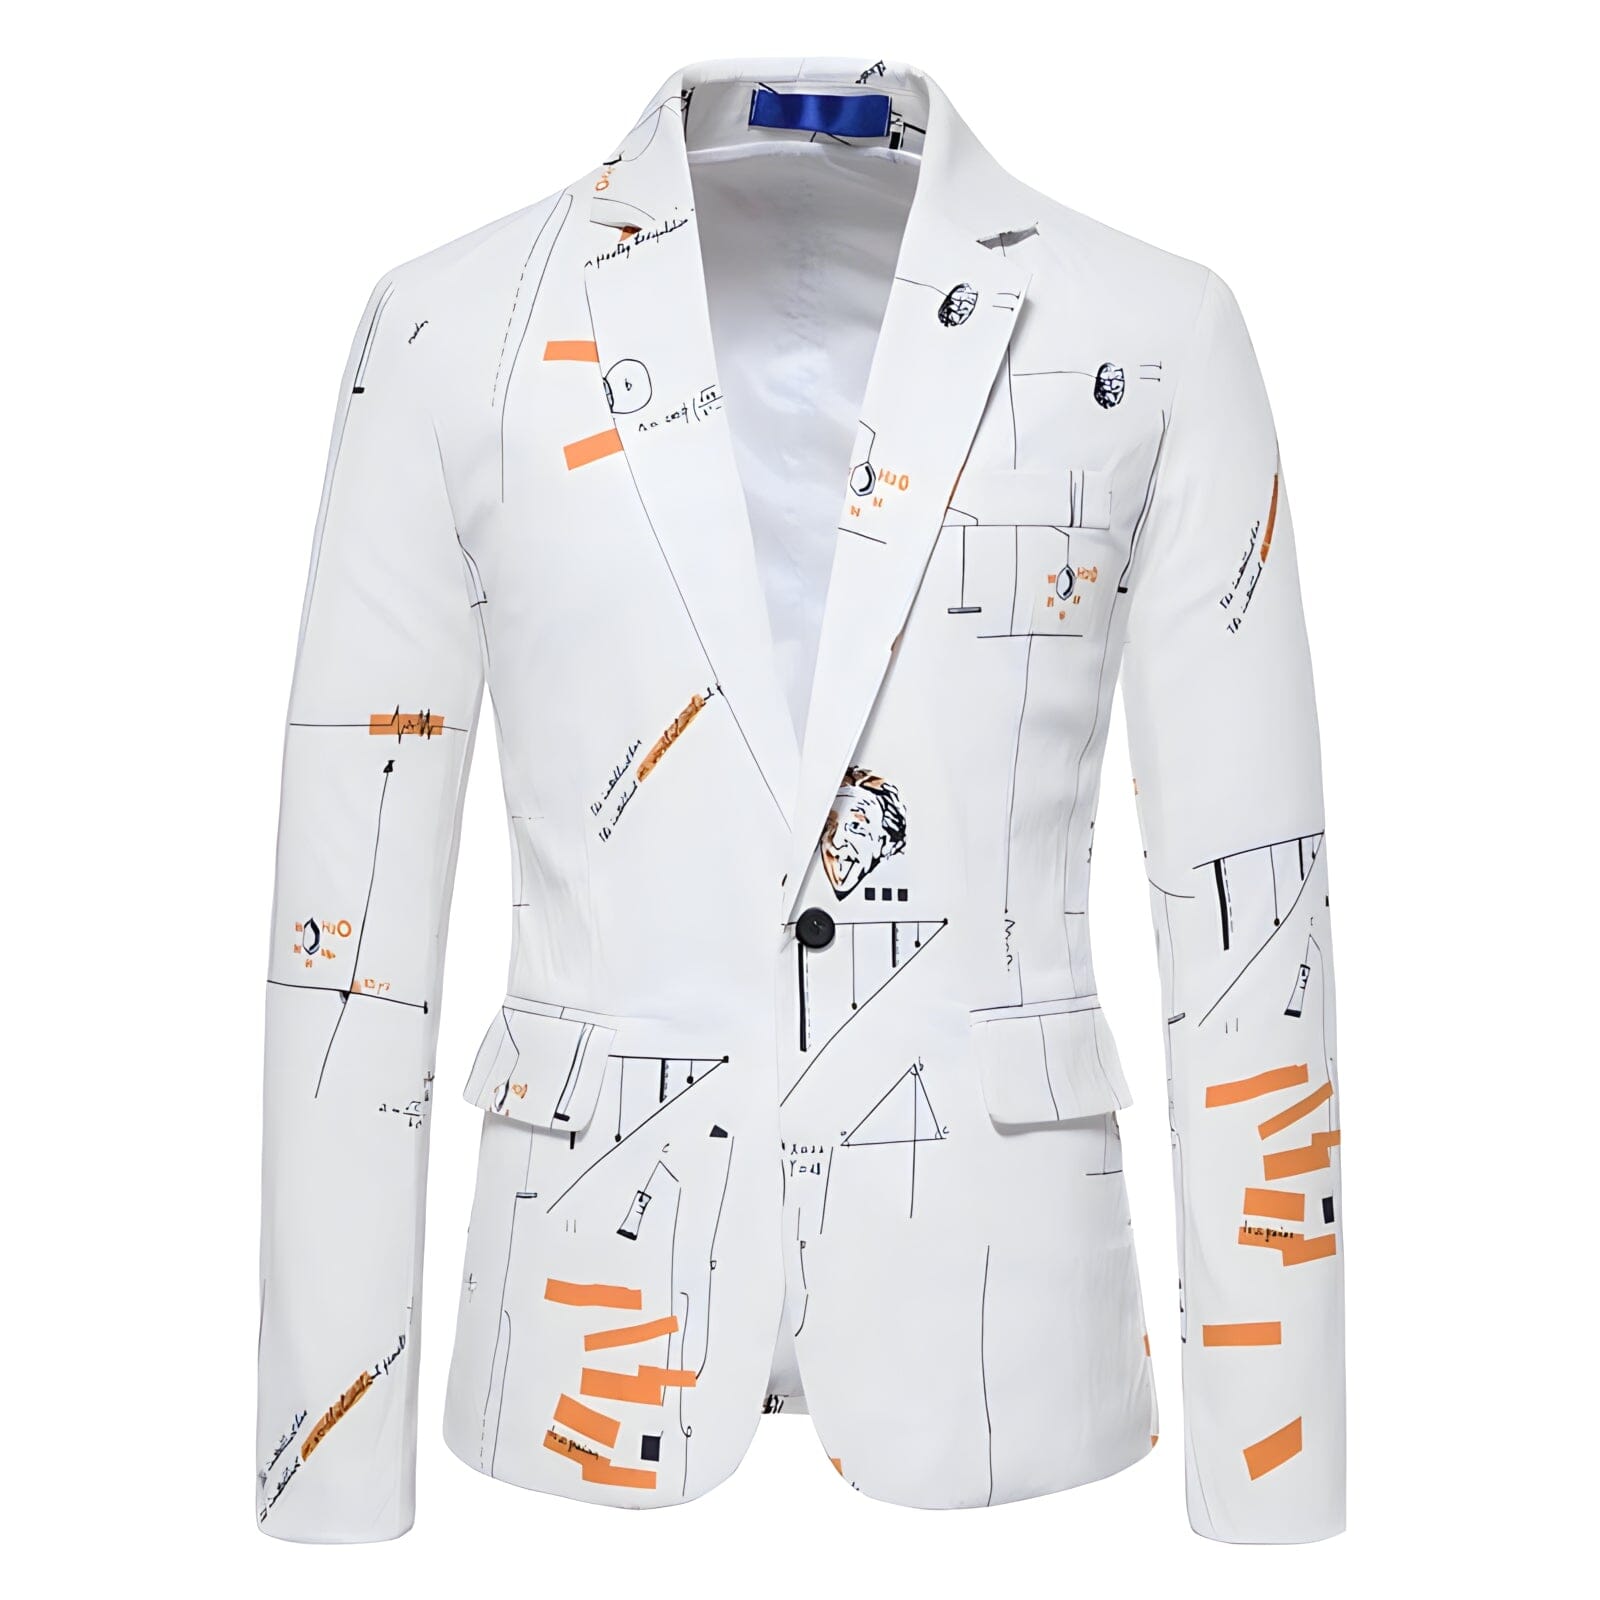 The Chauncey Slim Fit Blazer Suit Jacket - Multiple Colors WD Styles White S 